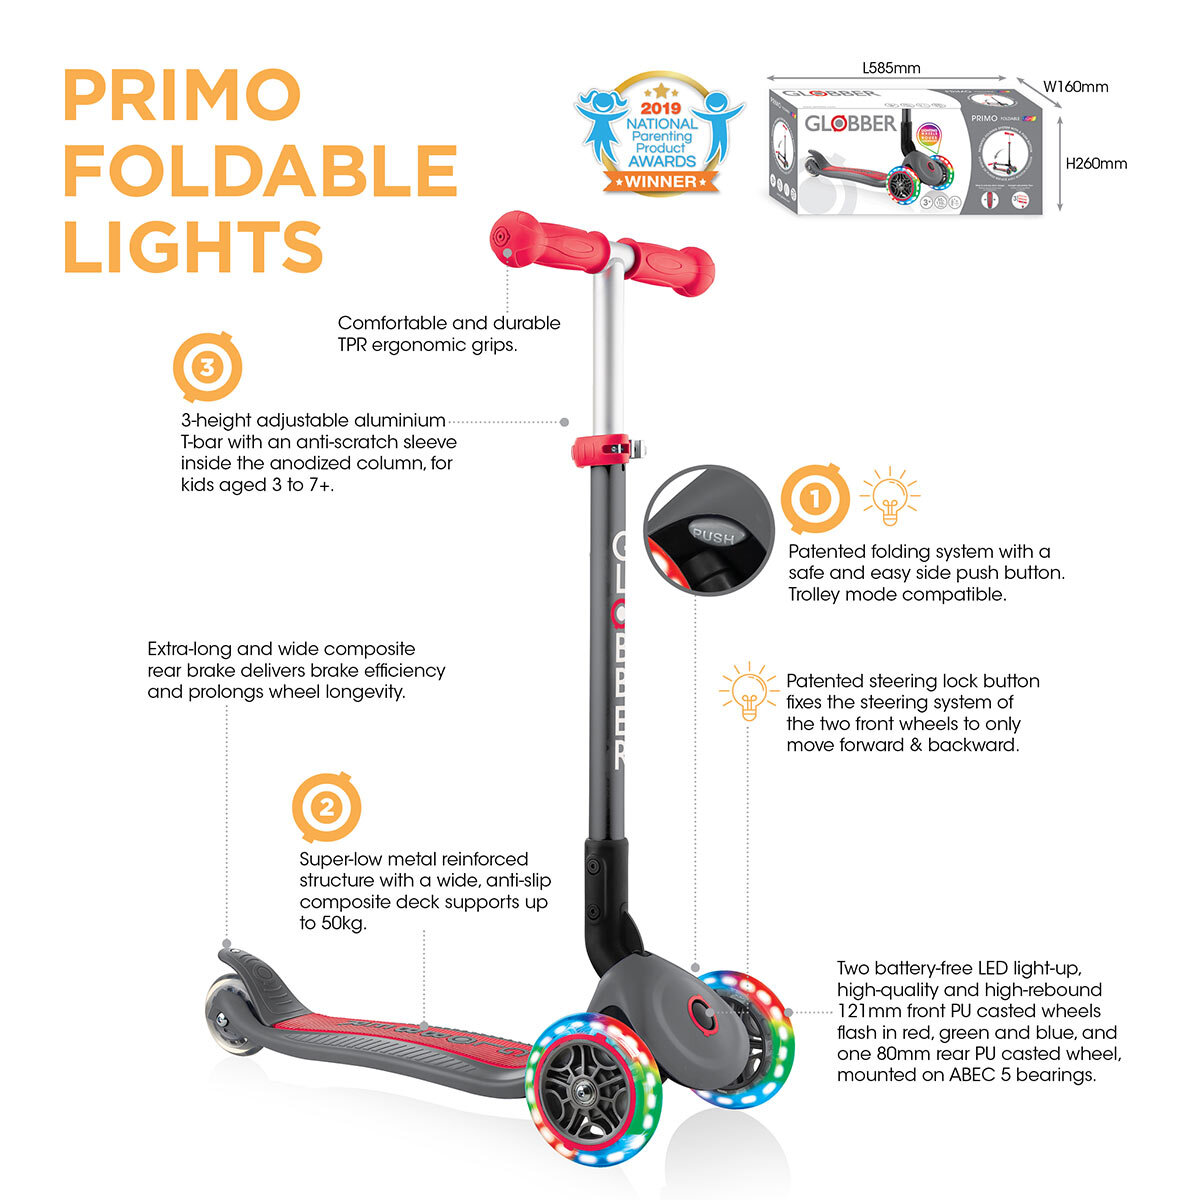 Buy Globber Primo Lights Scooter in Pink 7 Image at Costco.co.uk